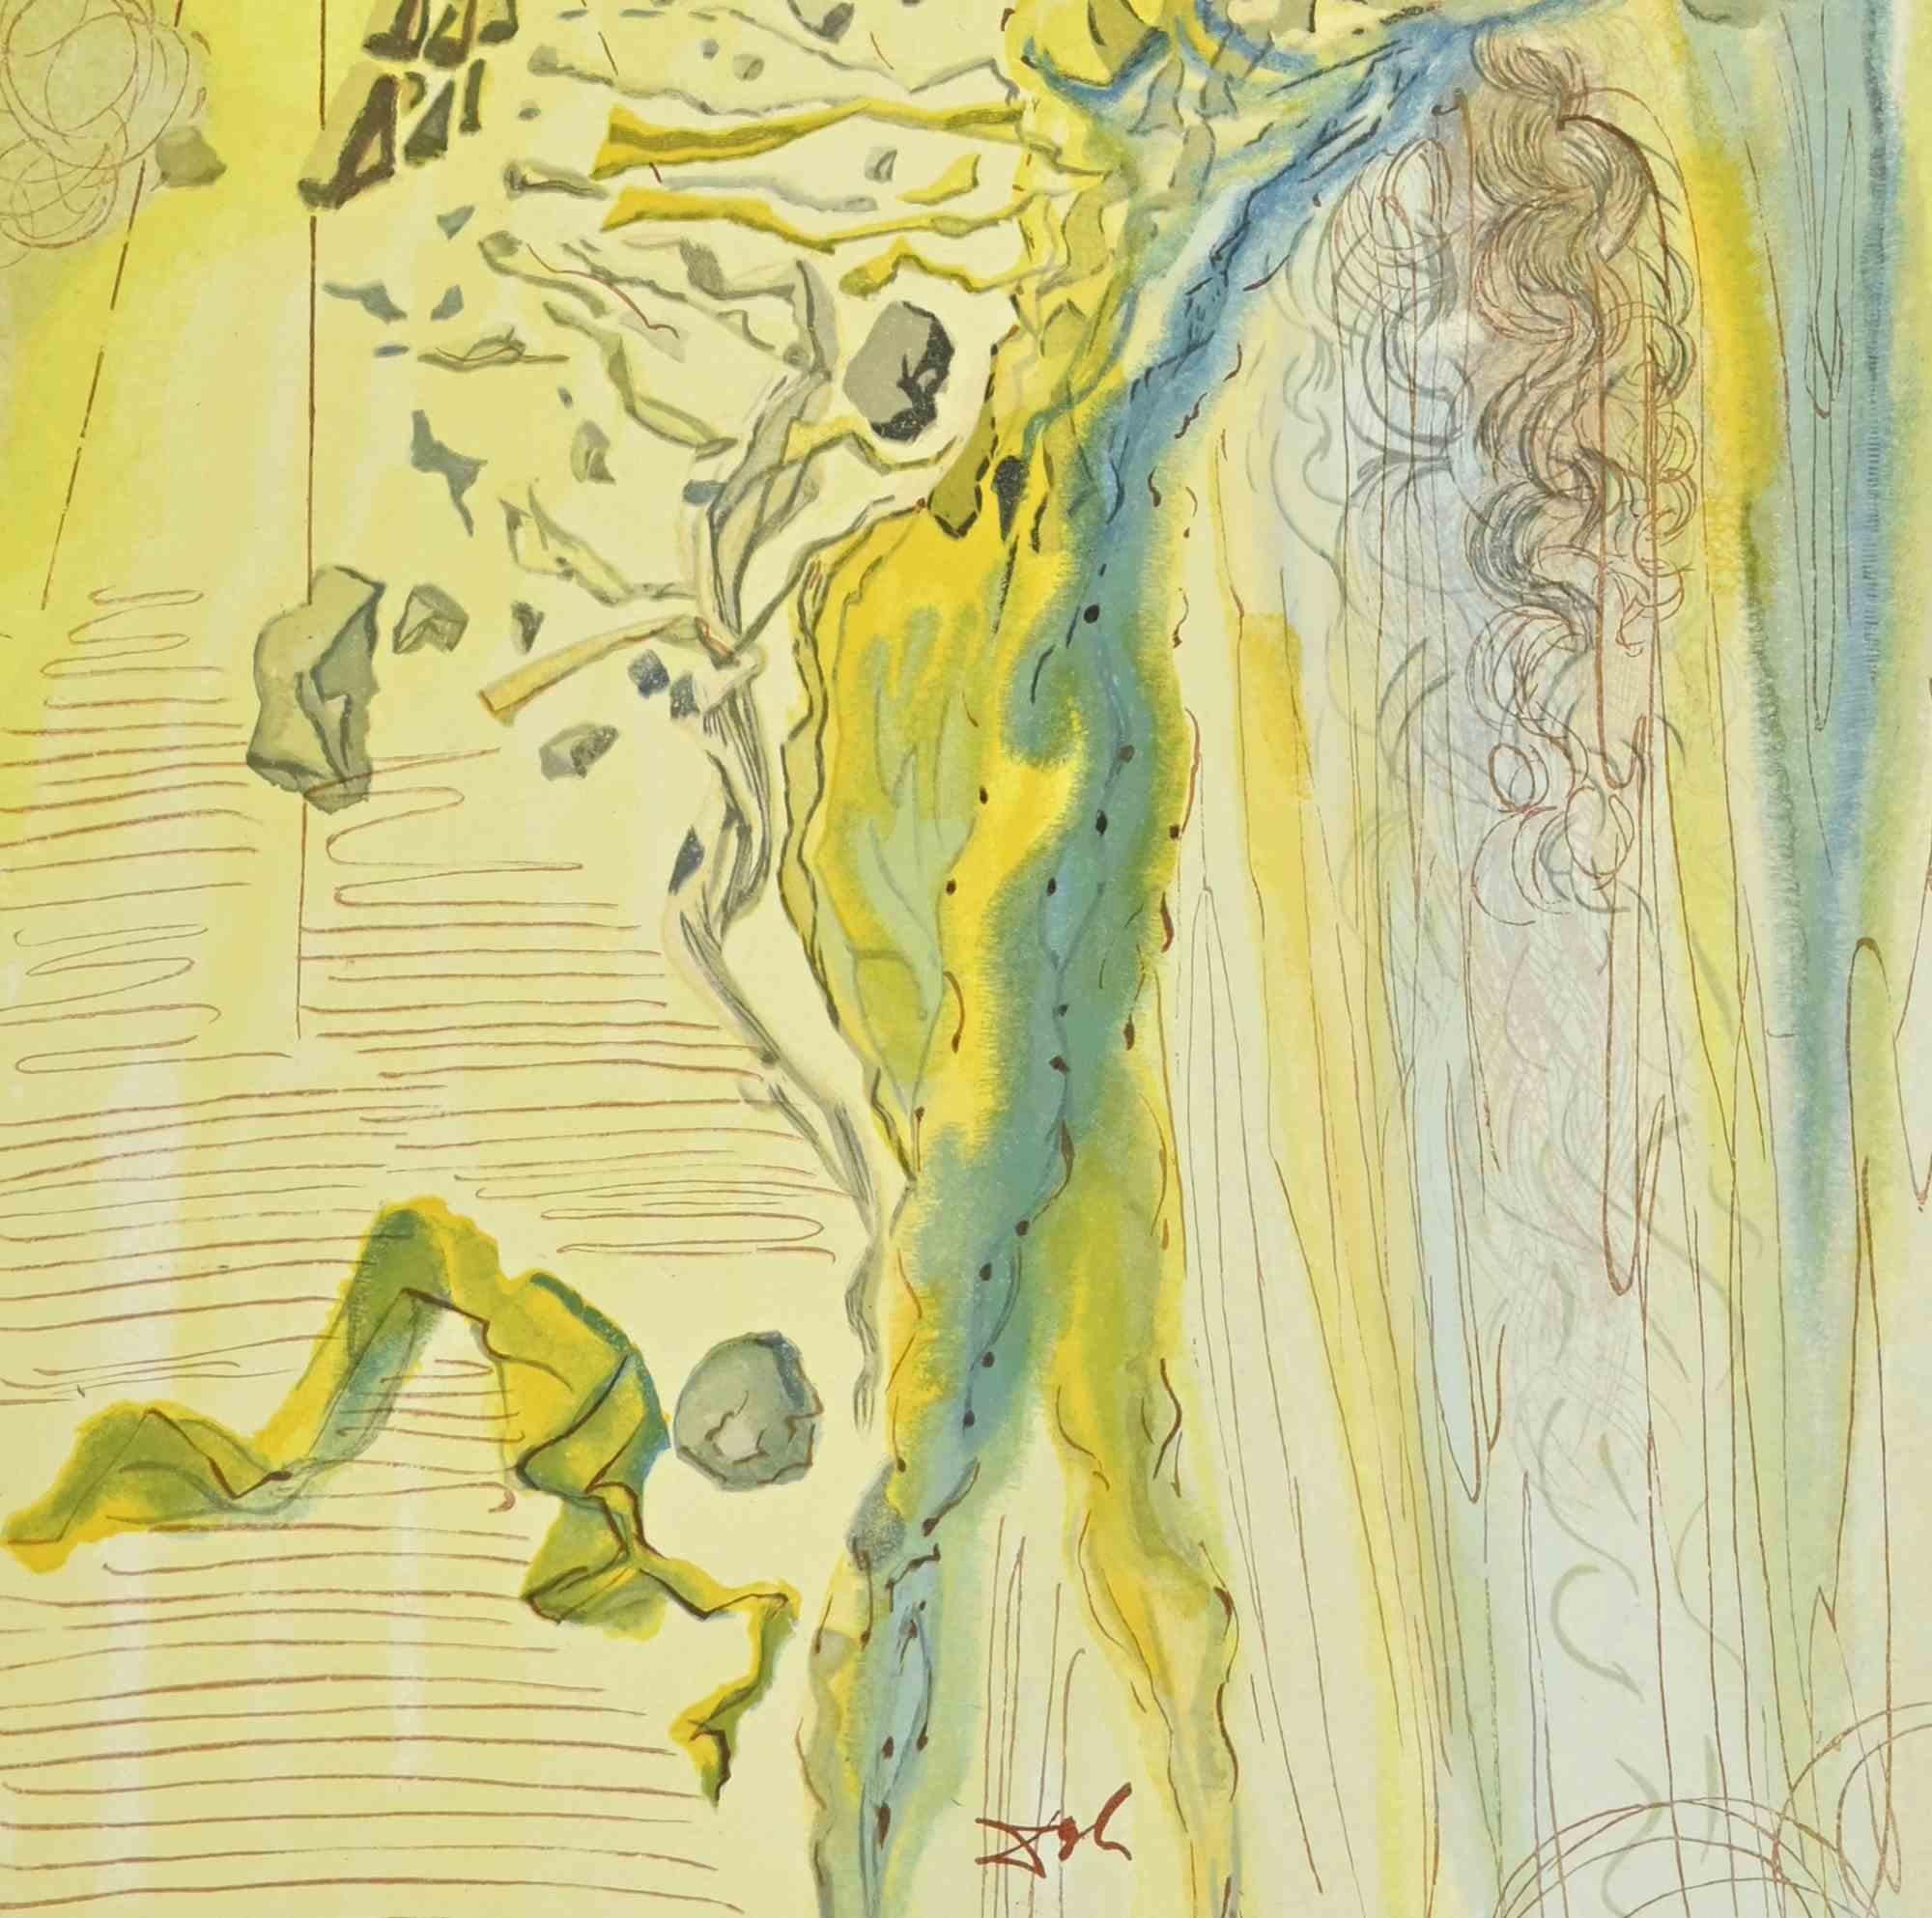 The Shine of Bodies - Woodcut print - 1963 - Print by Salvador Dalí